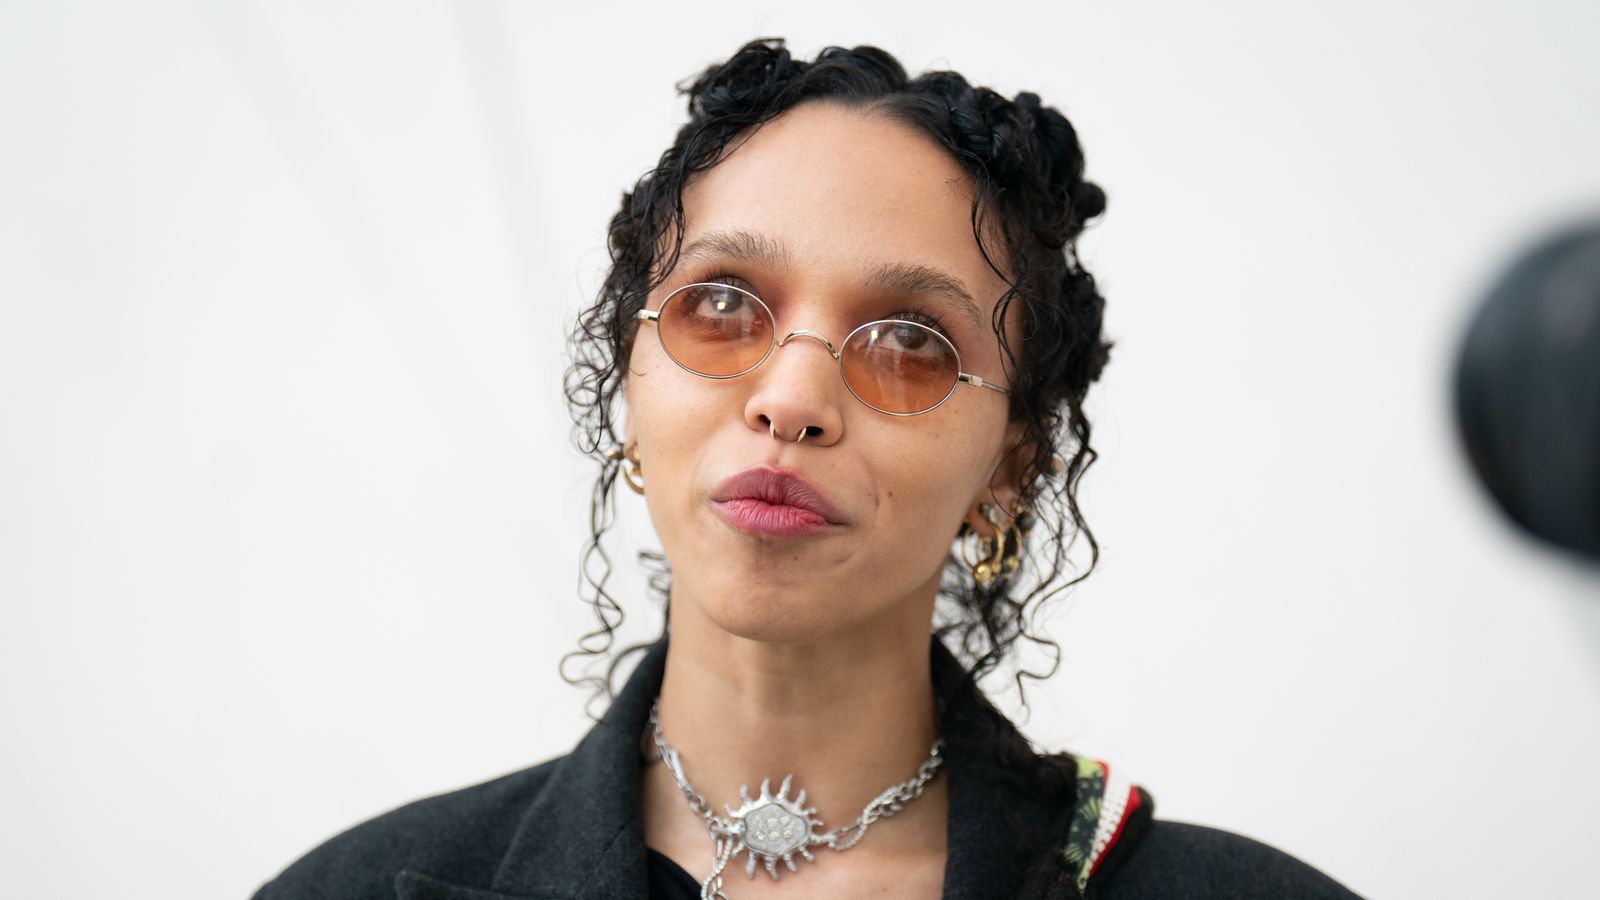 Calvin Klein ad featuring FKA twigs banned over complaints it